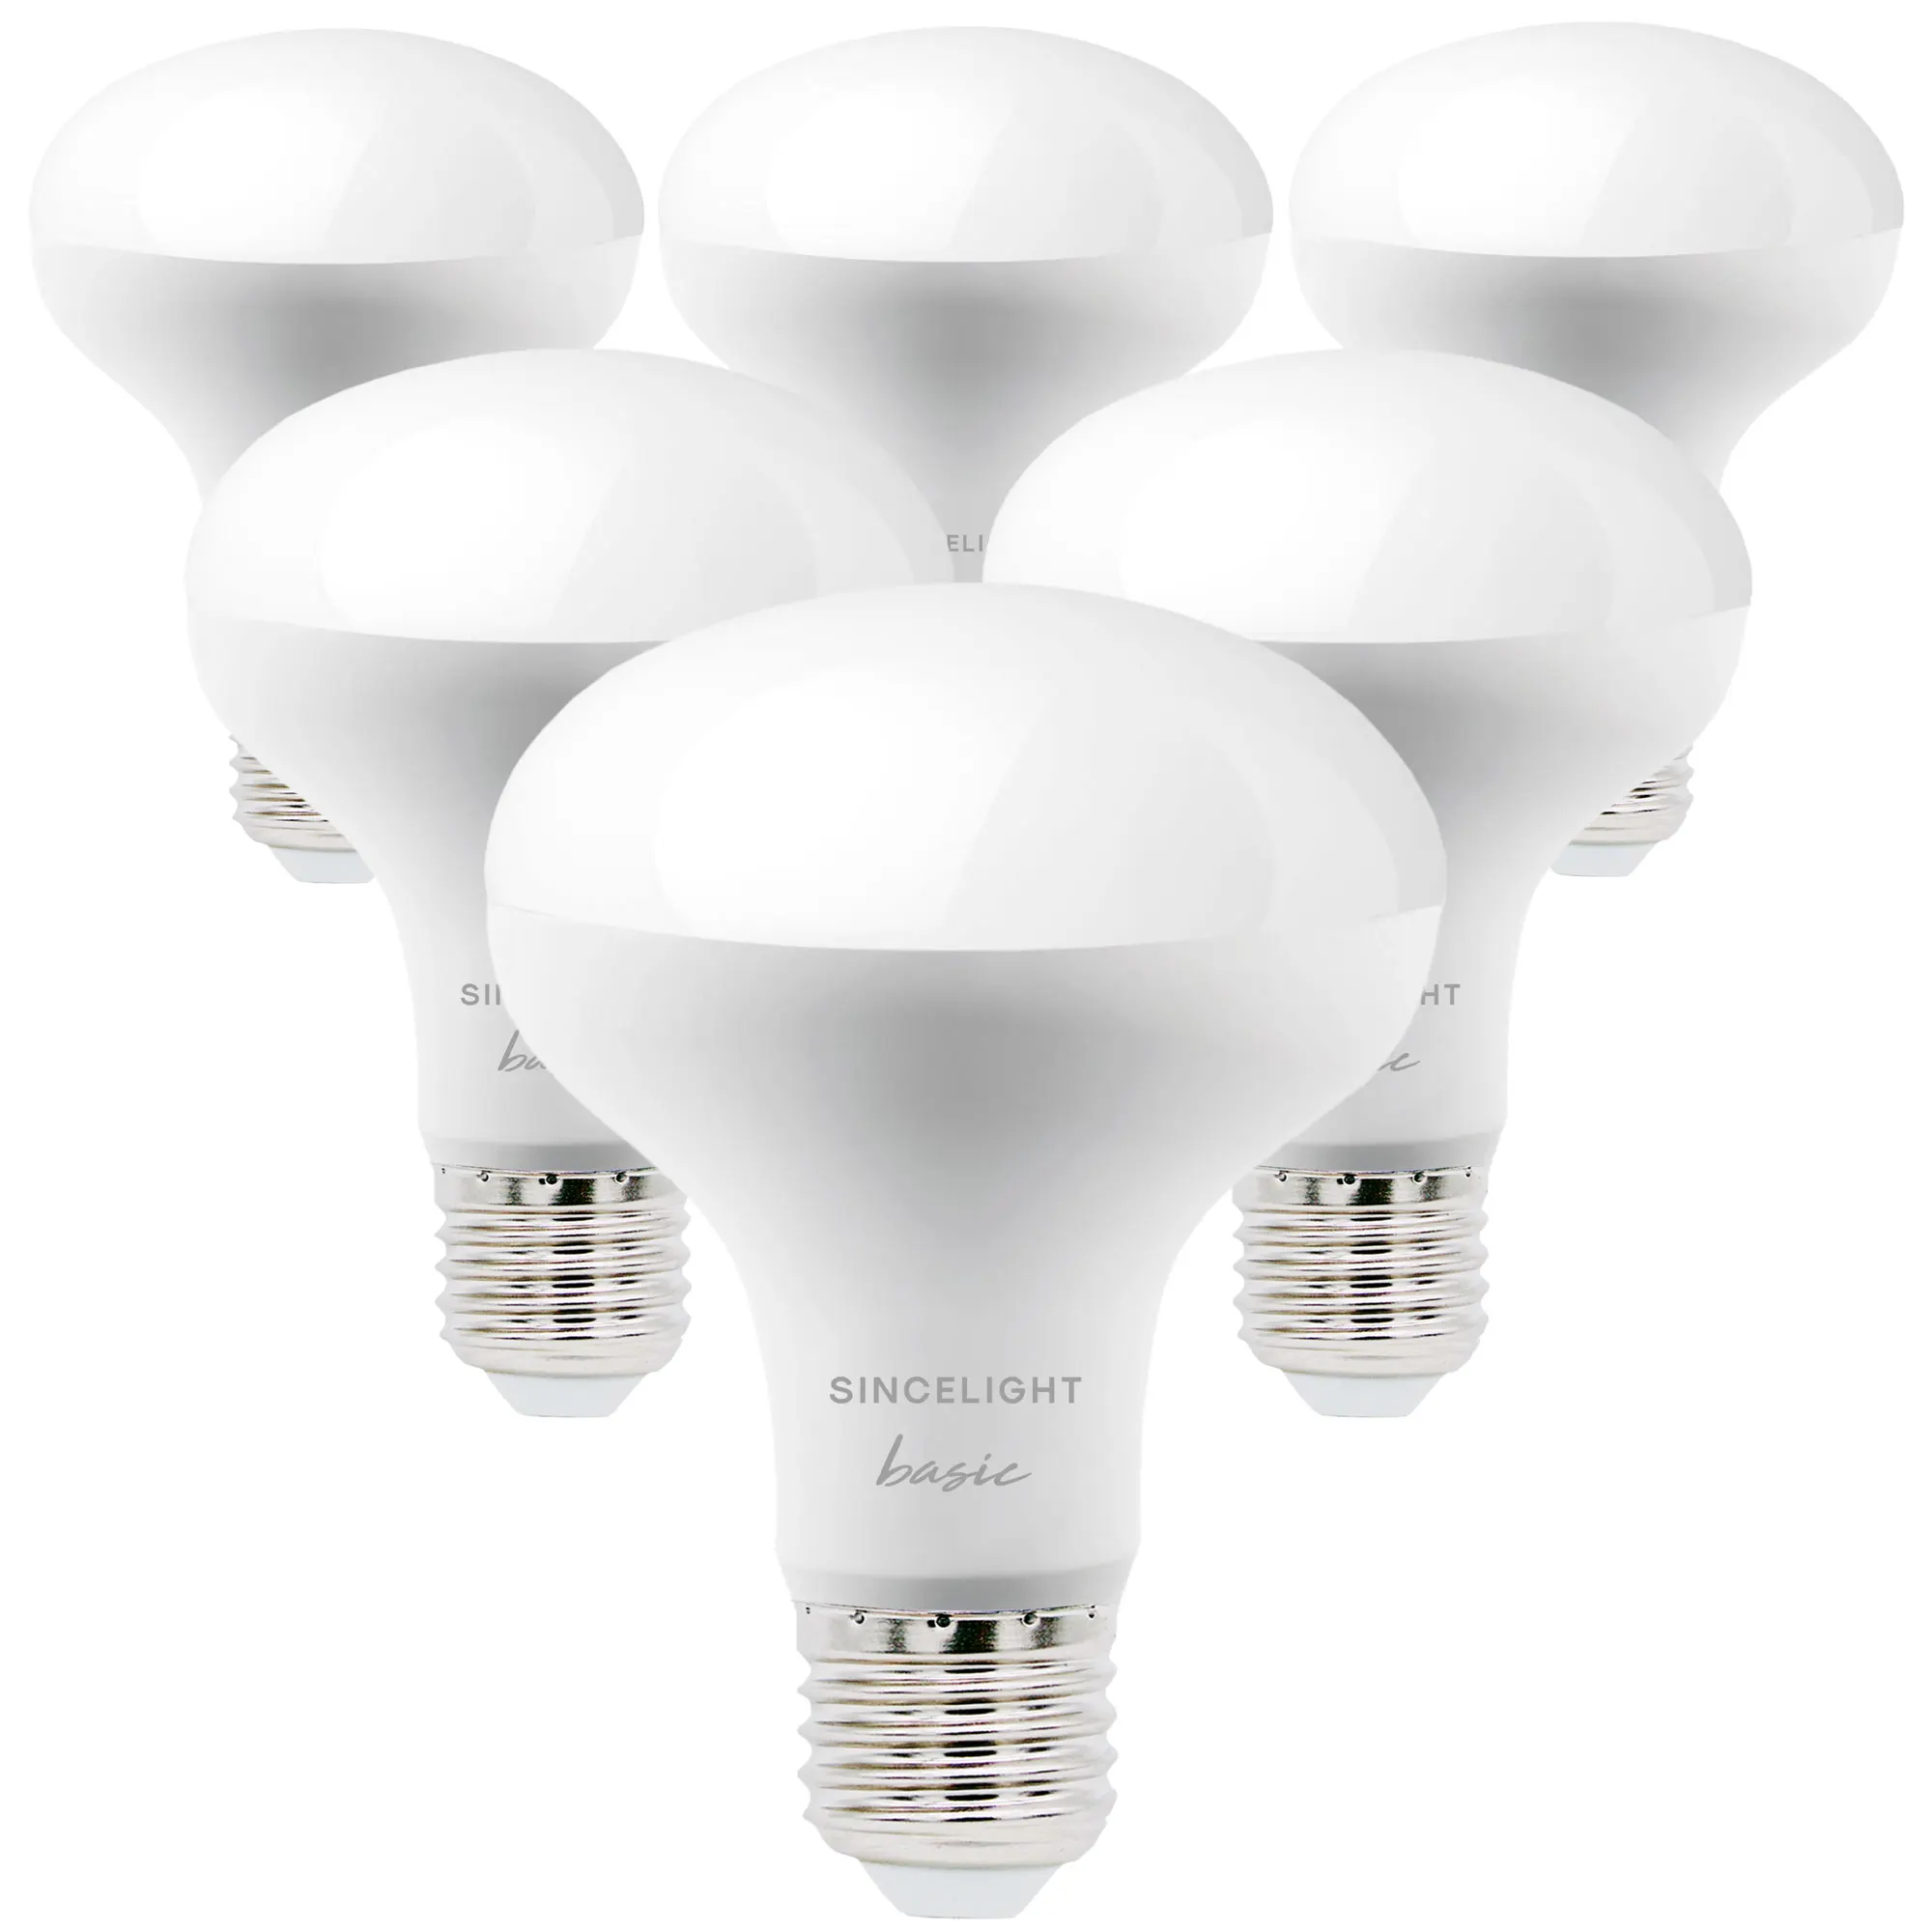 Pack of 6 ,E27 LED Reflector Light Bulb with 9W,2700K,4000K（R80/120° Beam Angle/Non-Dimmable/Spotlight Bulb/Downlights)For Home